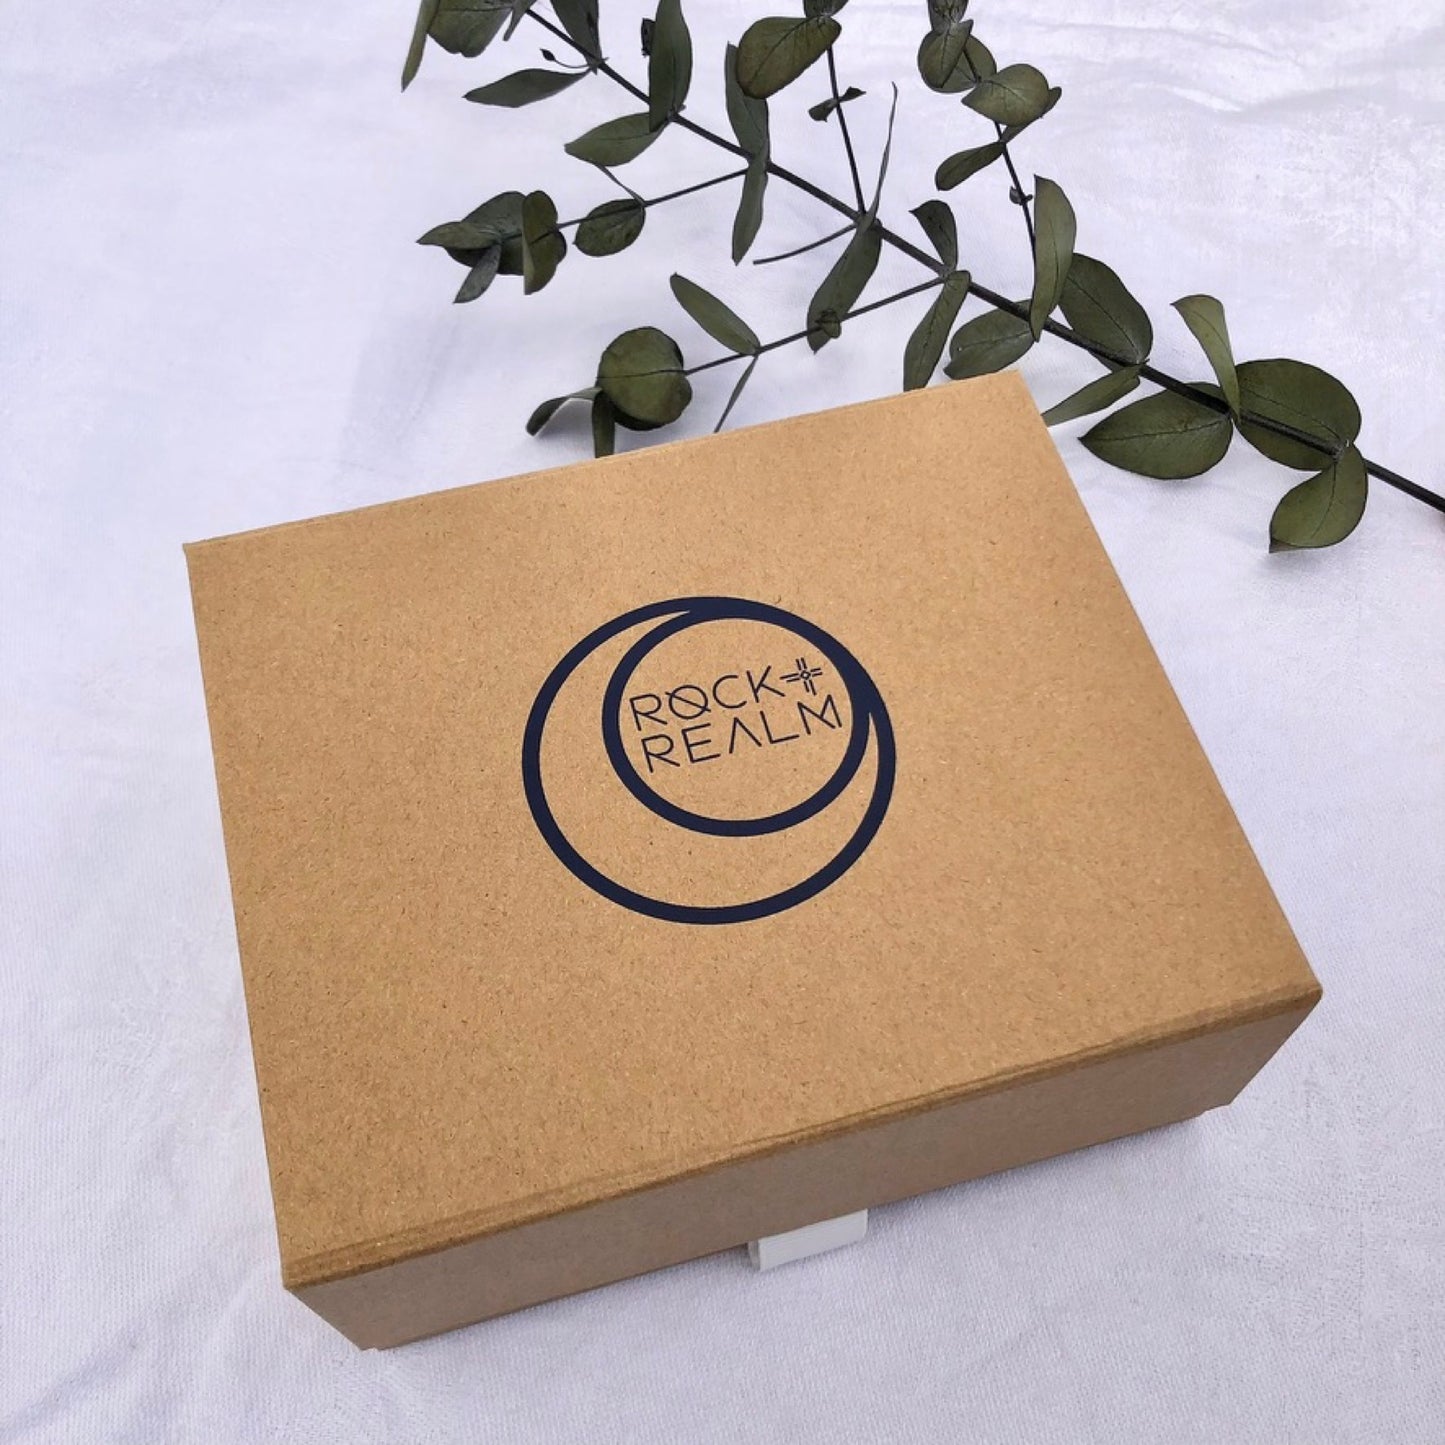 Craft brown recycled gift box branded with rock + realm in navy blue